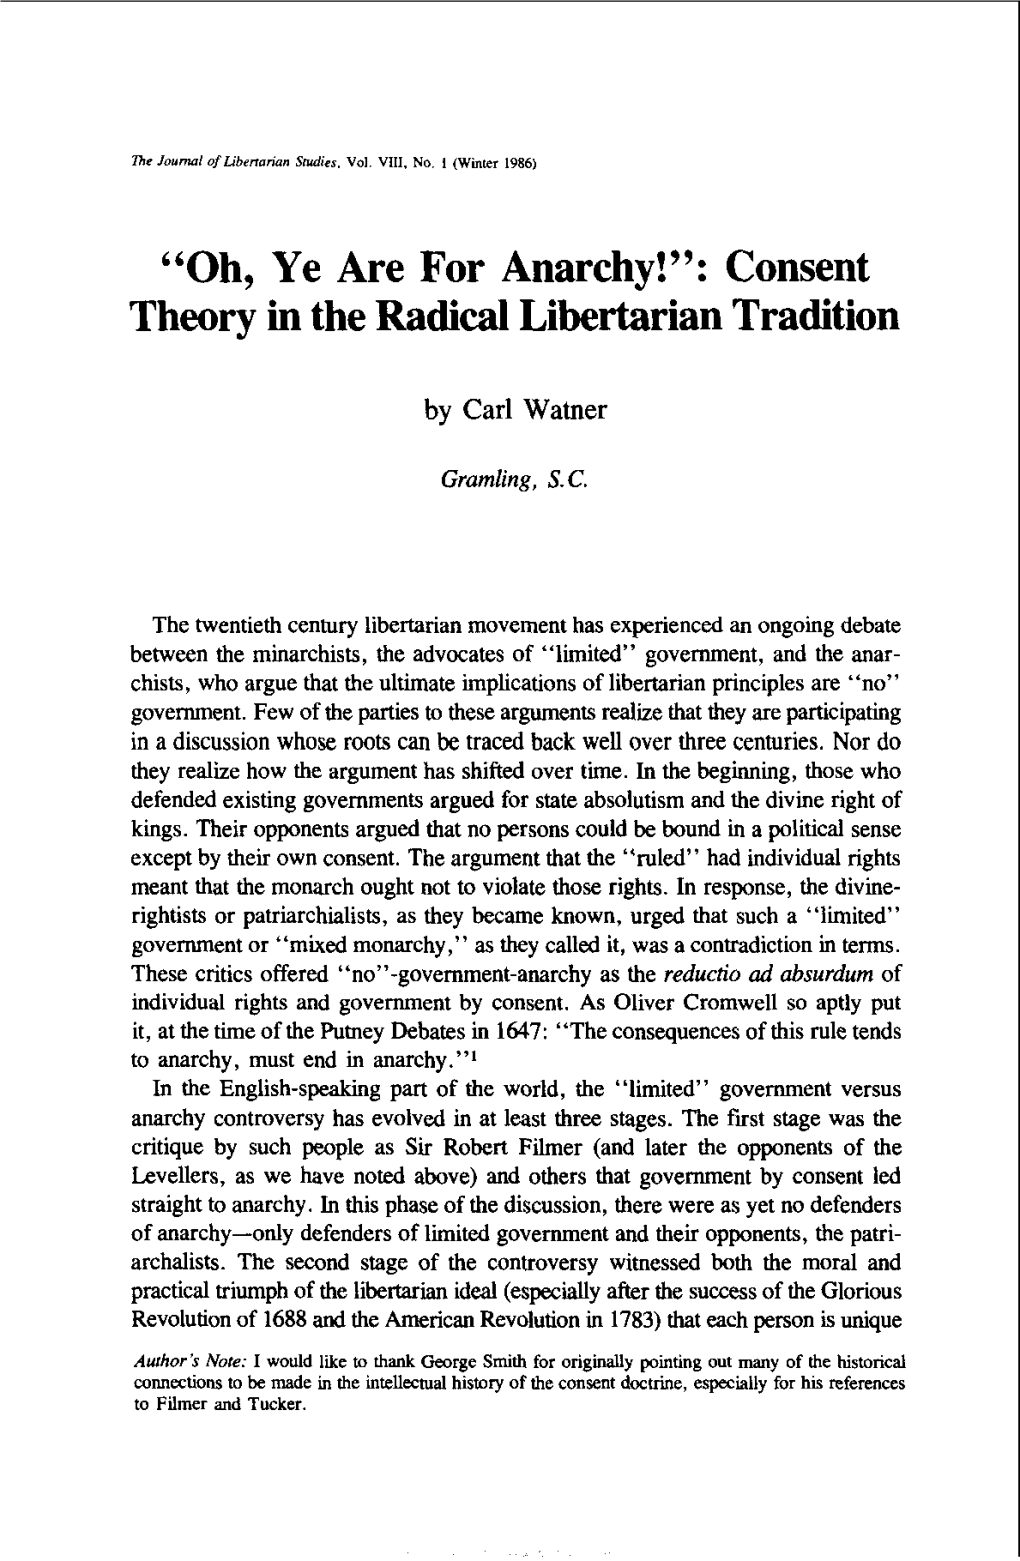 "Oh, Ye Are for Anarchy!": Consent Theory in the Radical Libertarian Tradition